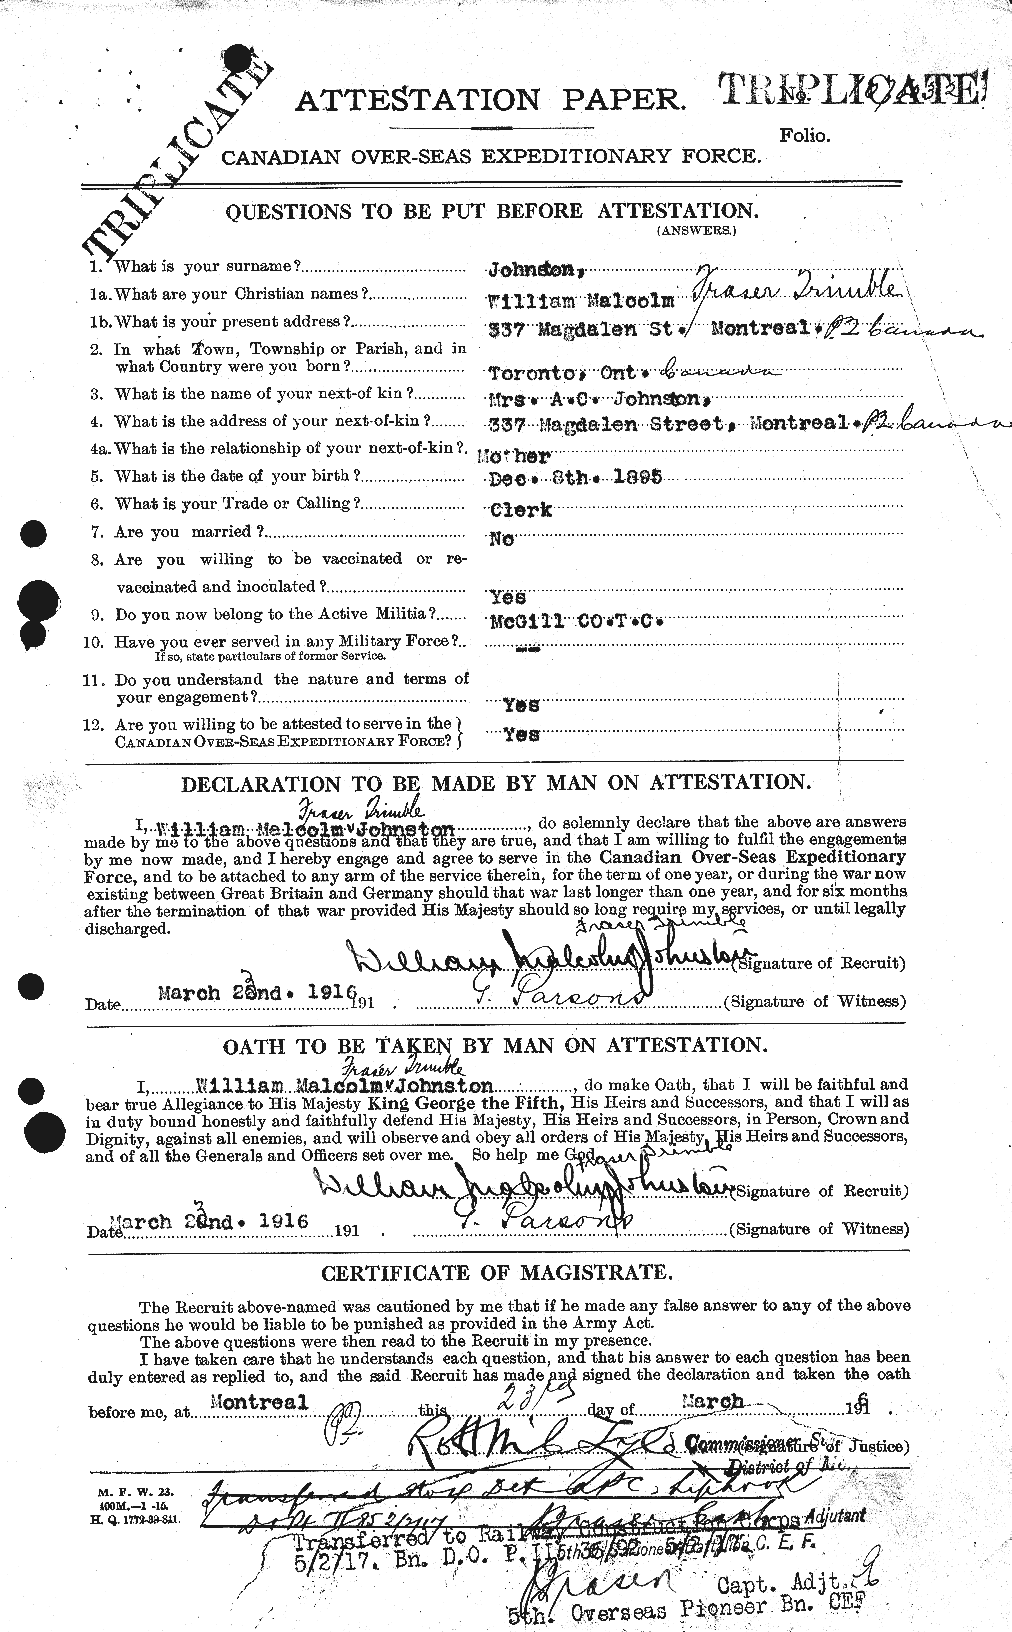 Personnel Records of the First World War - CEF 429604a